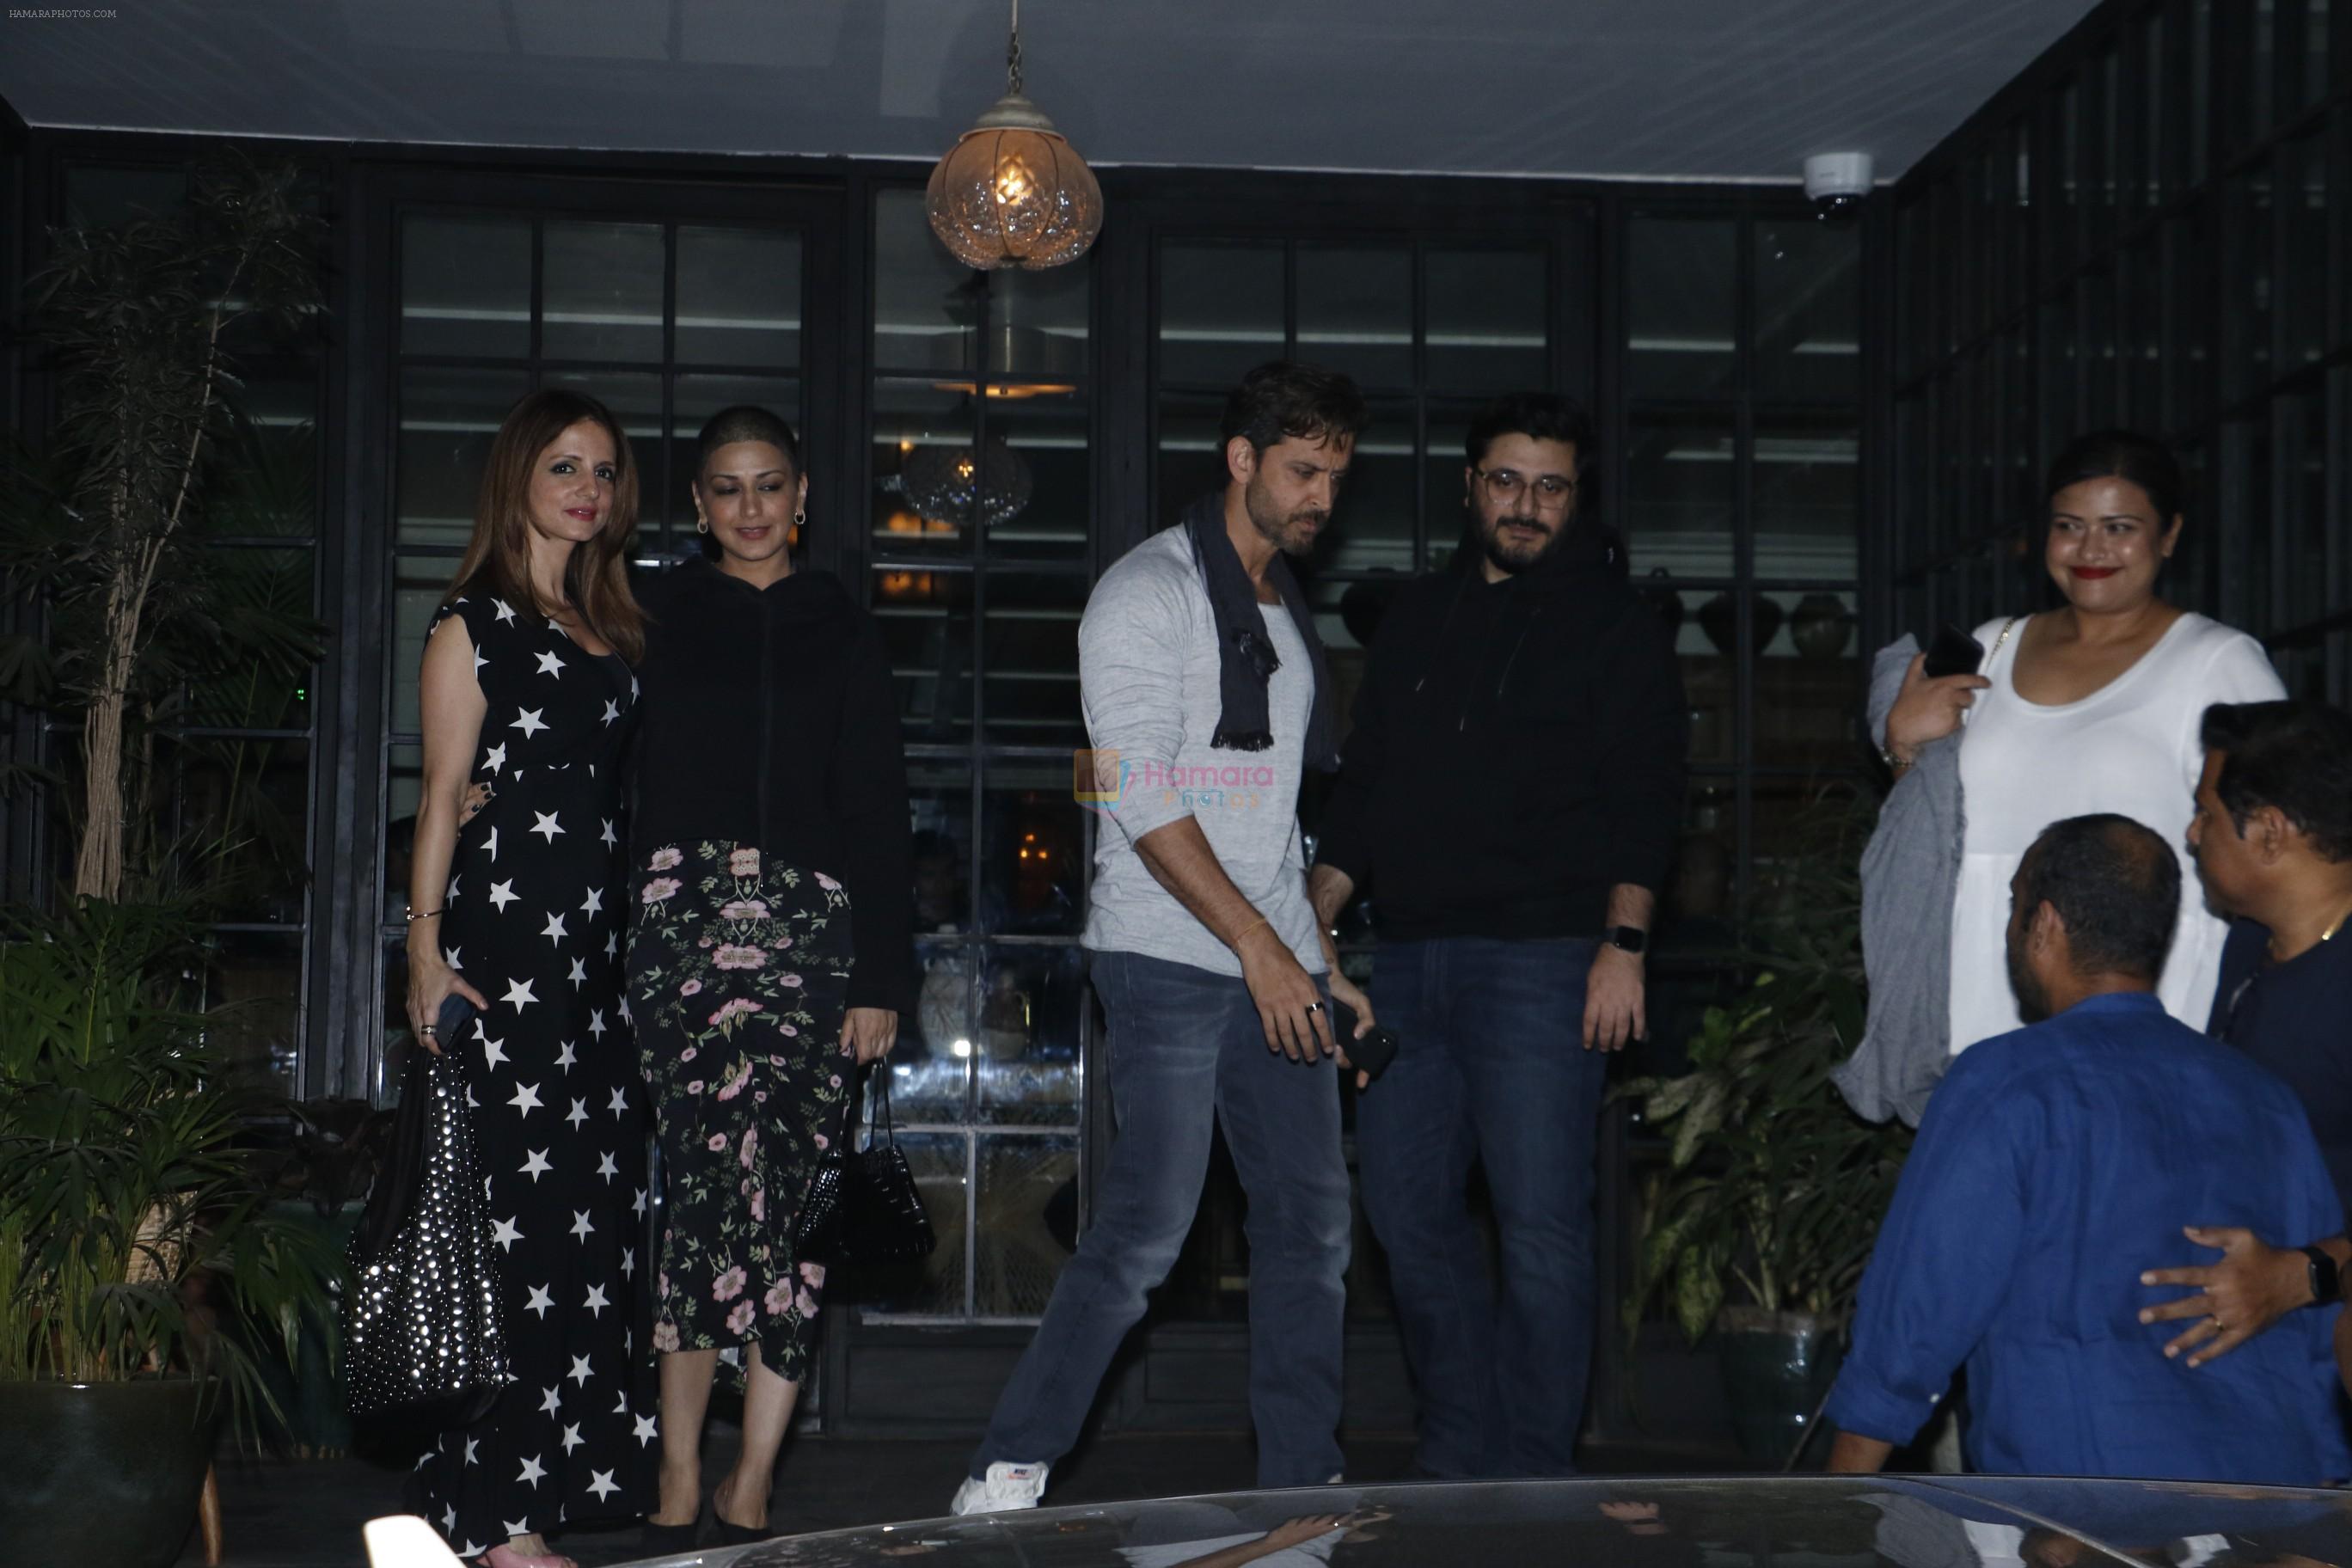 Hrithik Roshan, Sussanne, Sonali Bendre & Goldie Behl at Soho house in juhu on 10th Jan 2019